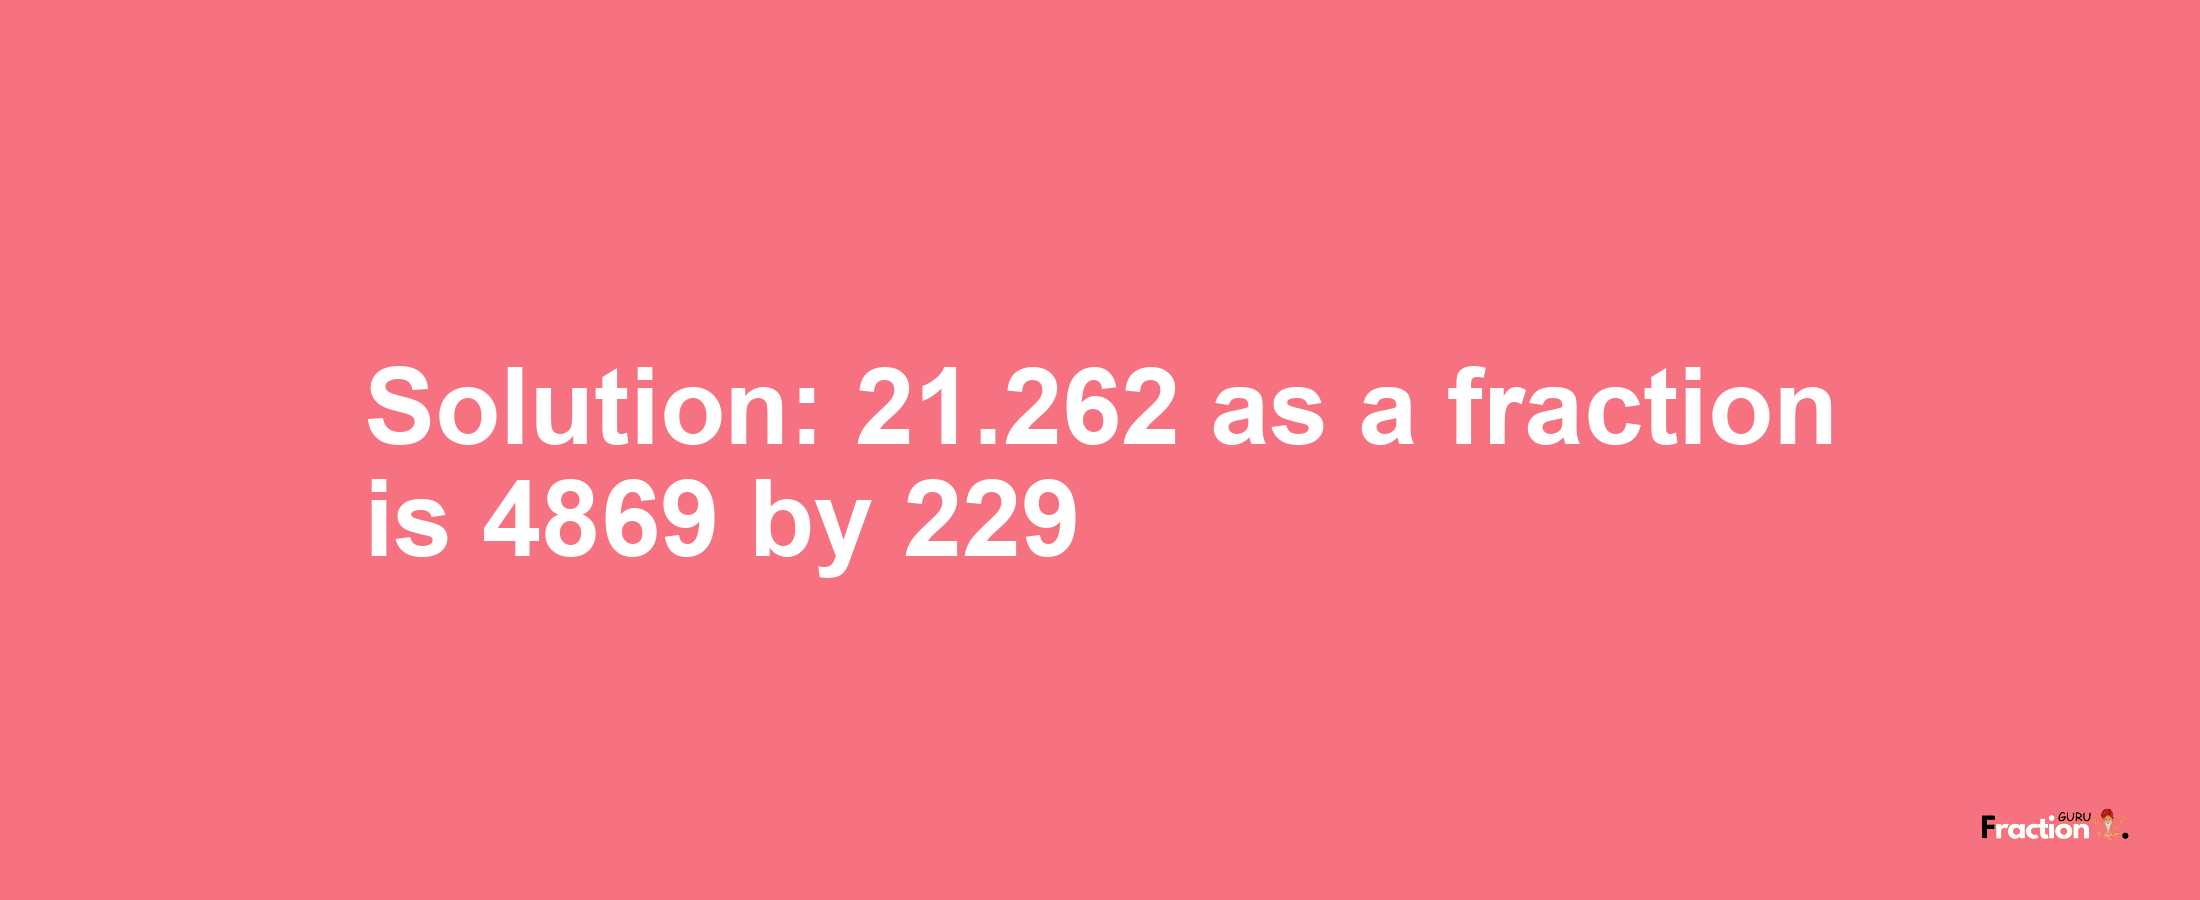 Solution:21.262 as a fraction is 4869/229